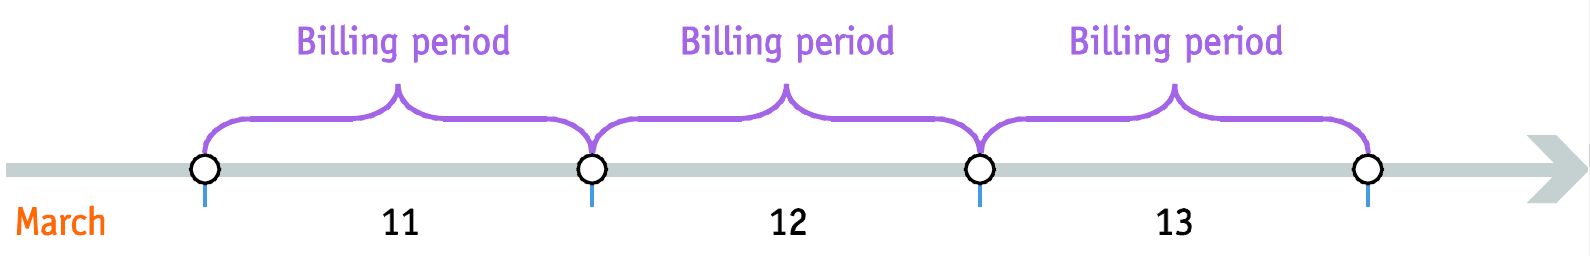 Daily billing period